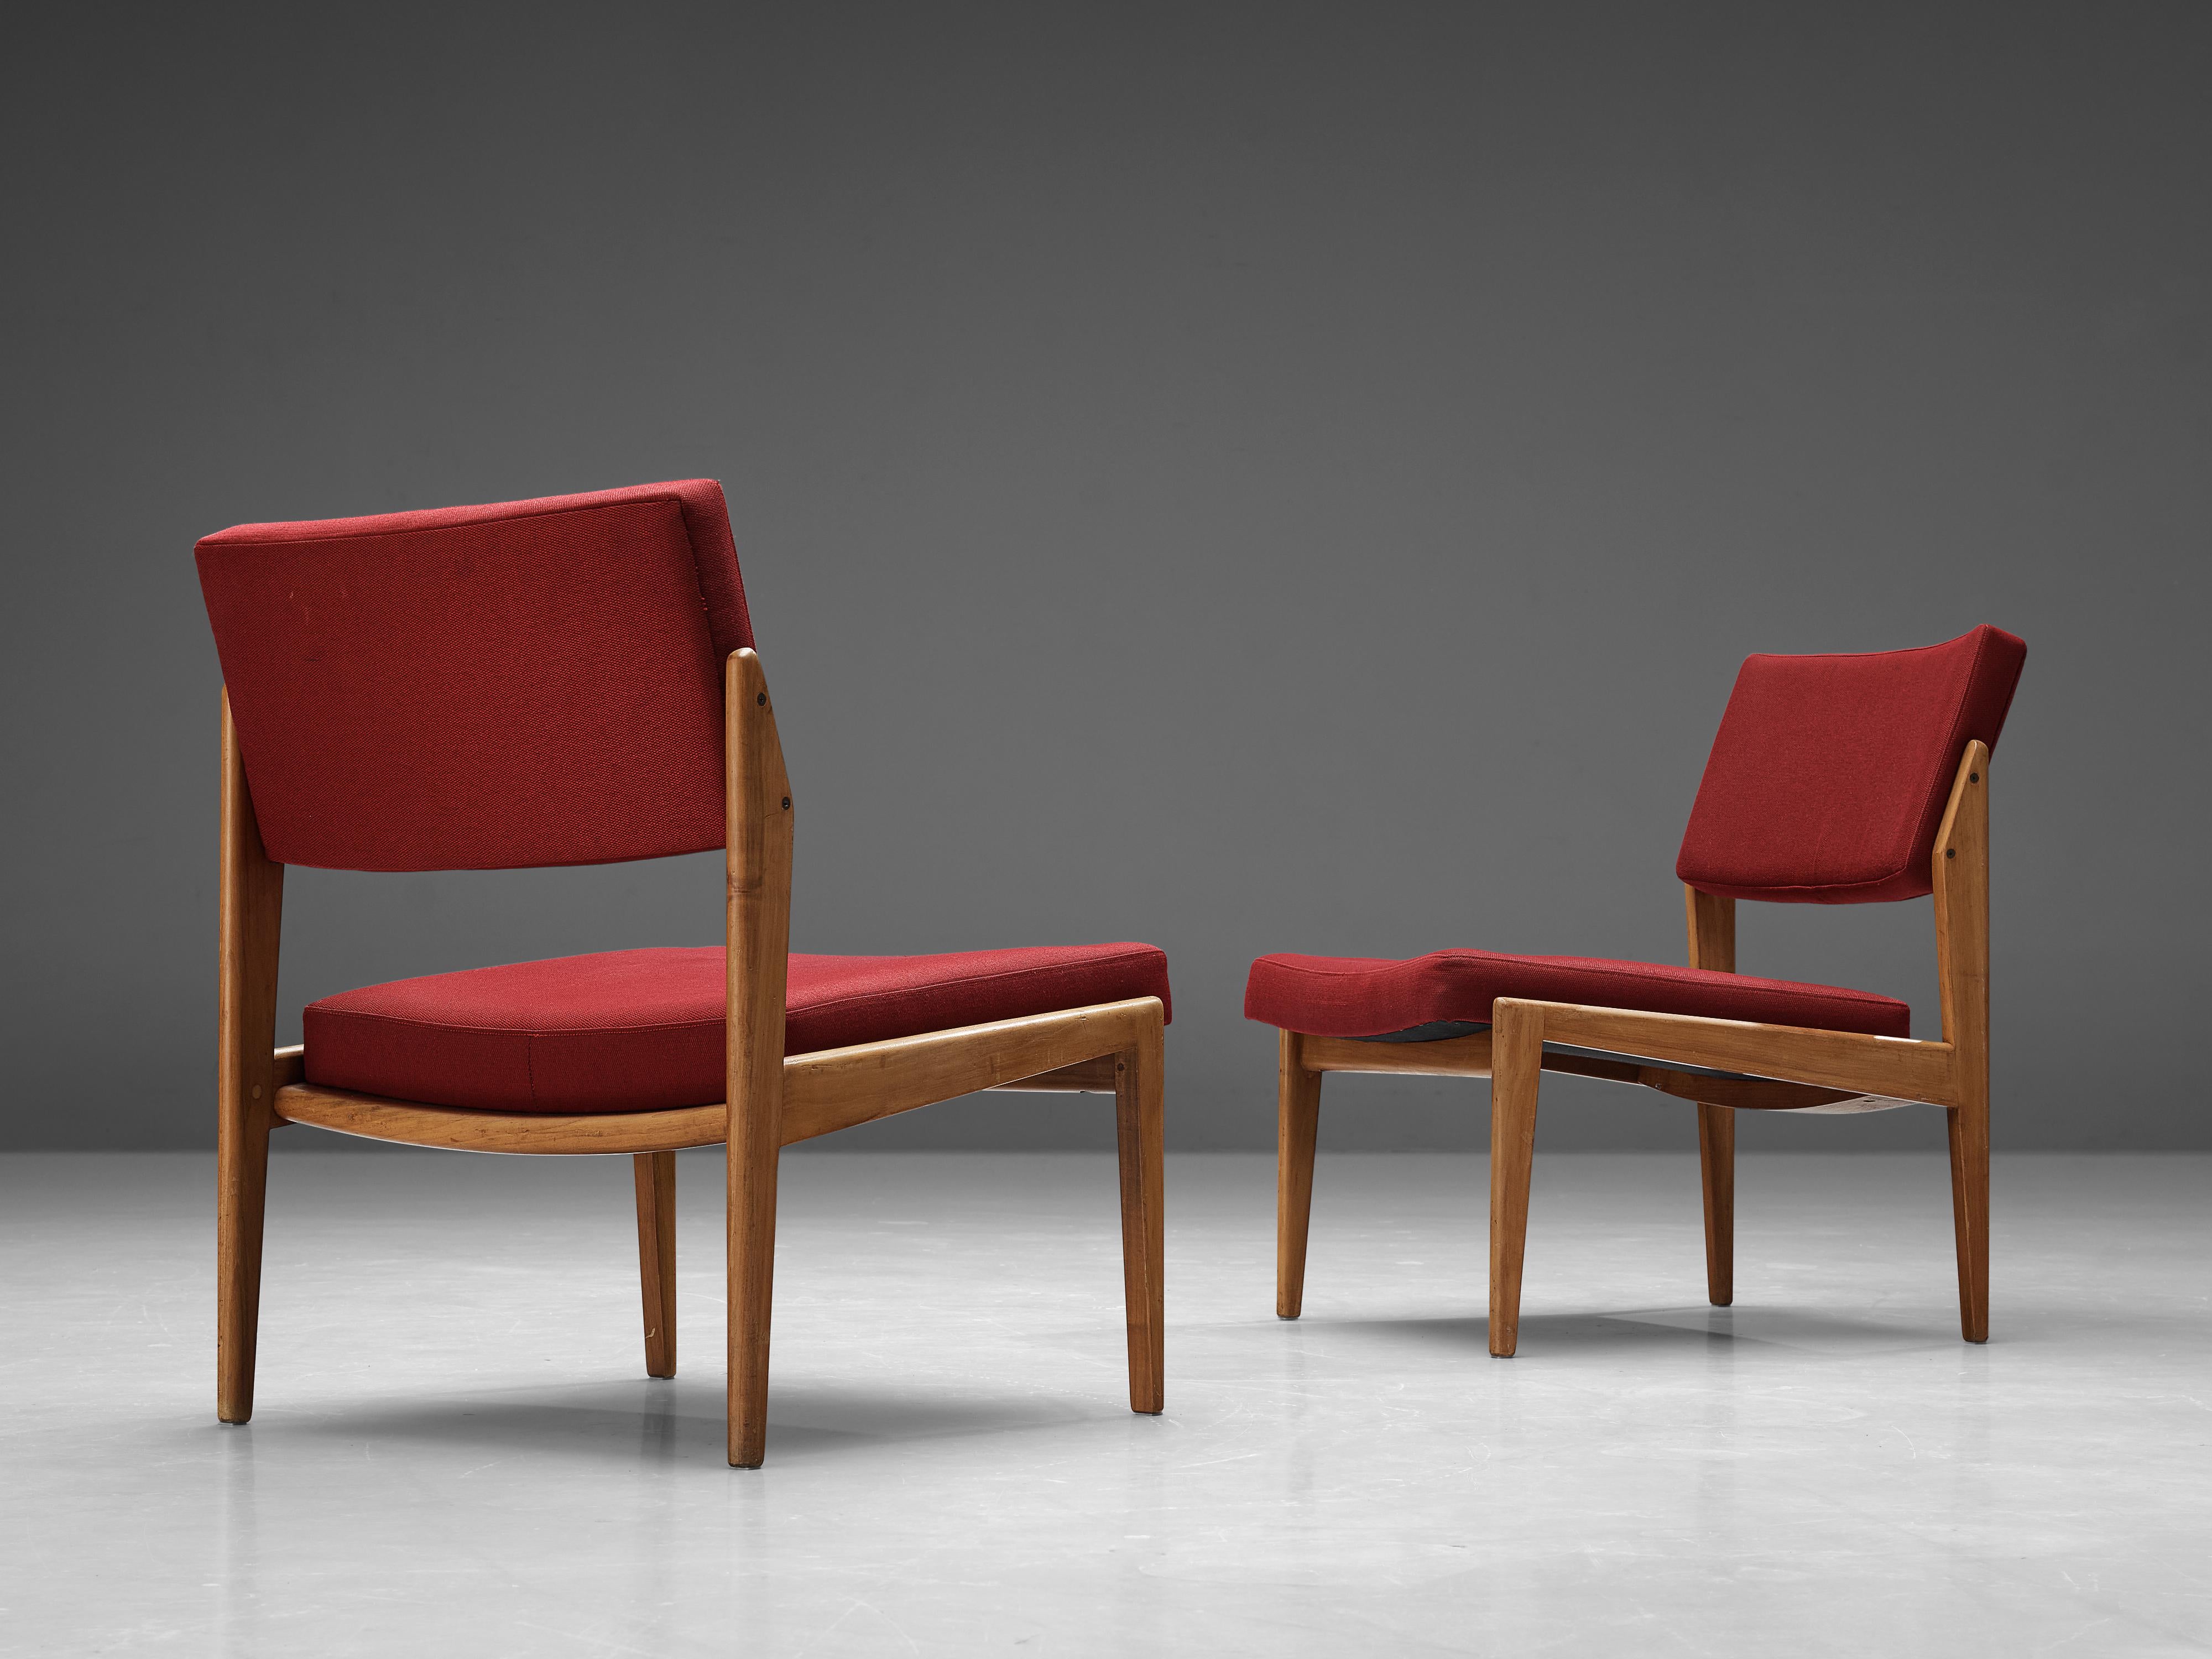 Thonet, pair of chairs, cherry, fabric, Germany, 1930s

This unique pair of chairs has a splendid construction that epitomizes a simplistic, natural and timeless aesthetics. The design is characterized by clear, straight lines that are noticeable in